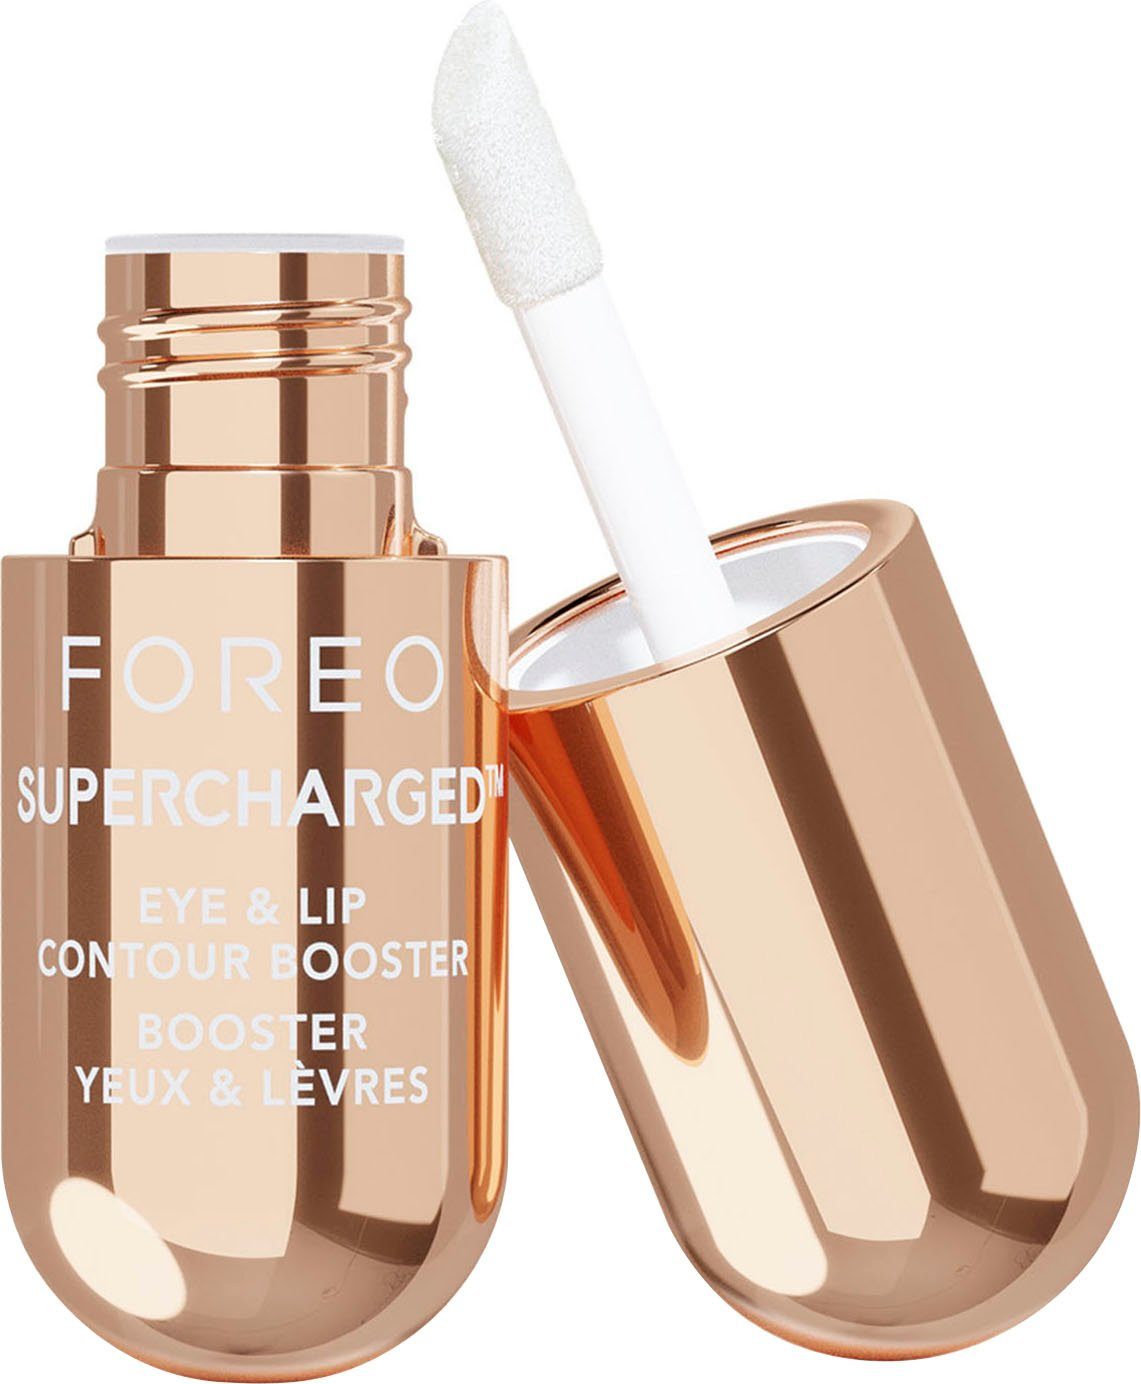 3,5 & x Feuchtigkeitsgel 3-tlg. LIP FOREO ml BOOSTER EYE SUPERCHARGED™ 3 CONTOUR Packung,